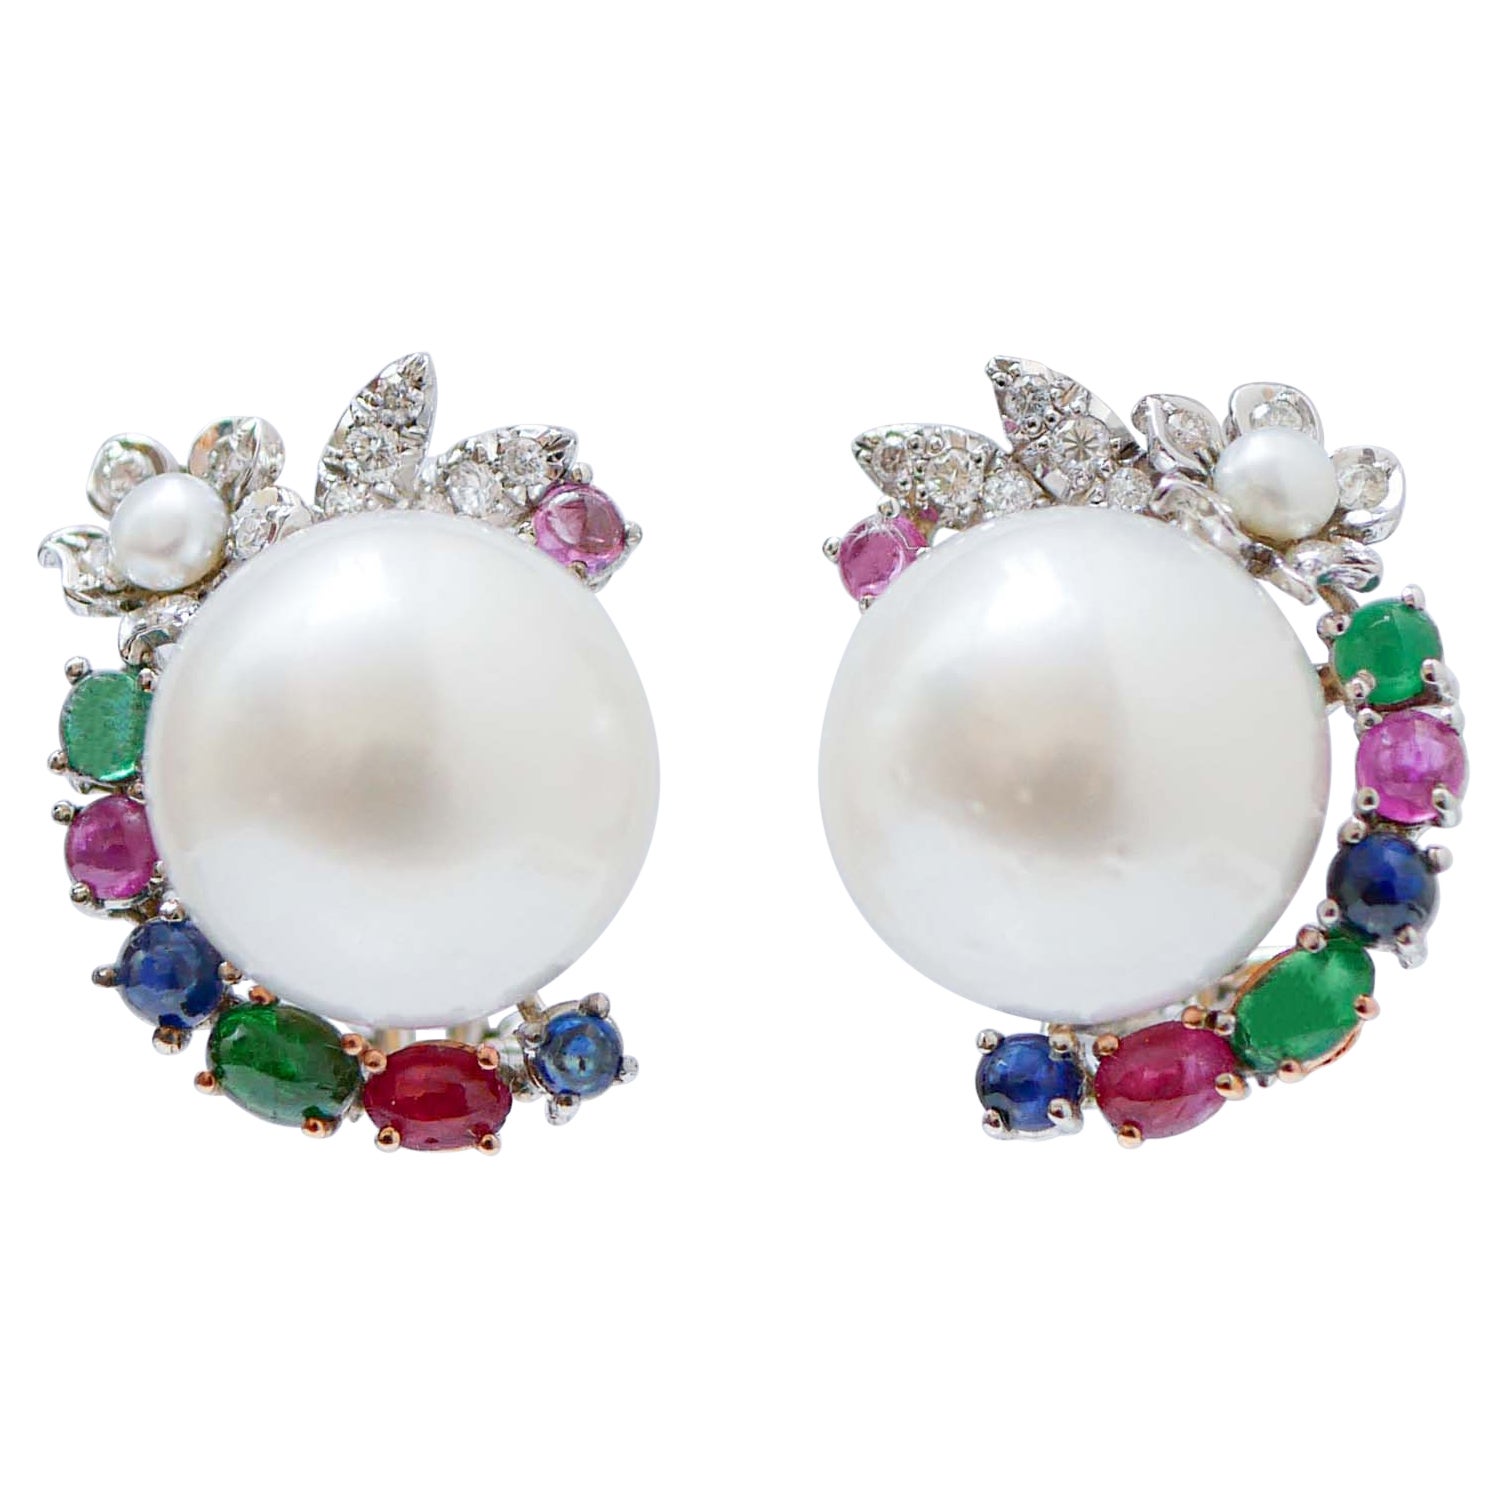 South-Sea Pearls, Rubies, Emeralds, Sapphires, Diamonds, 18Kt White Gold Earring